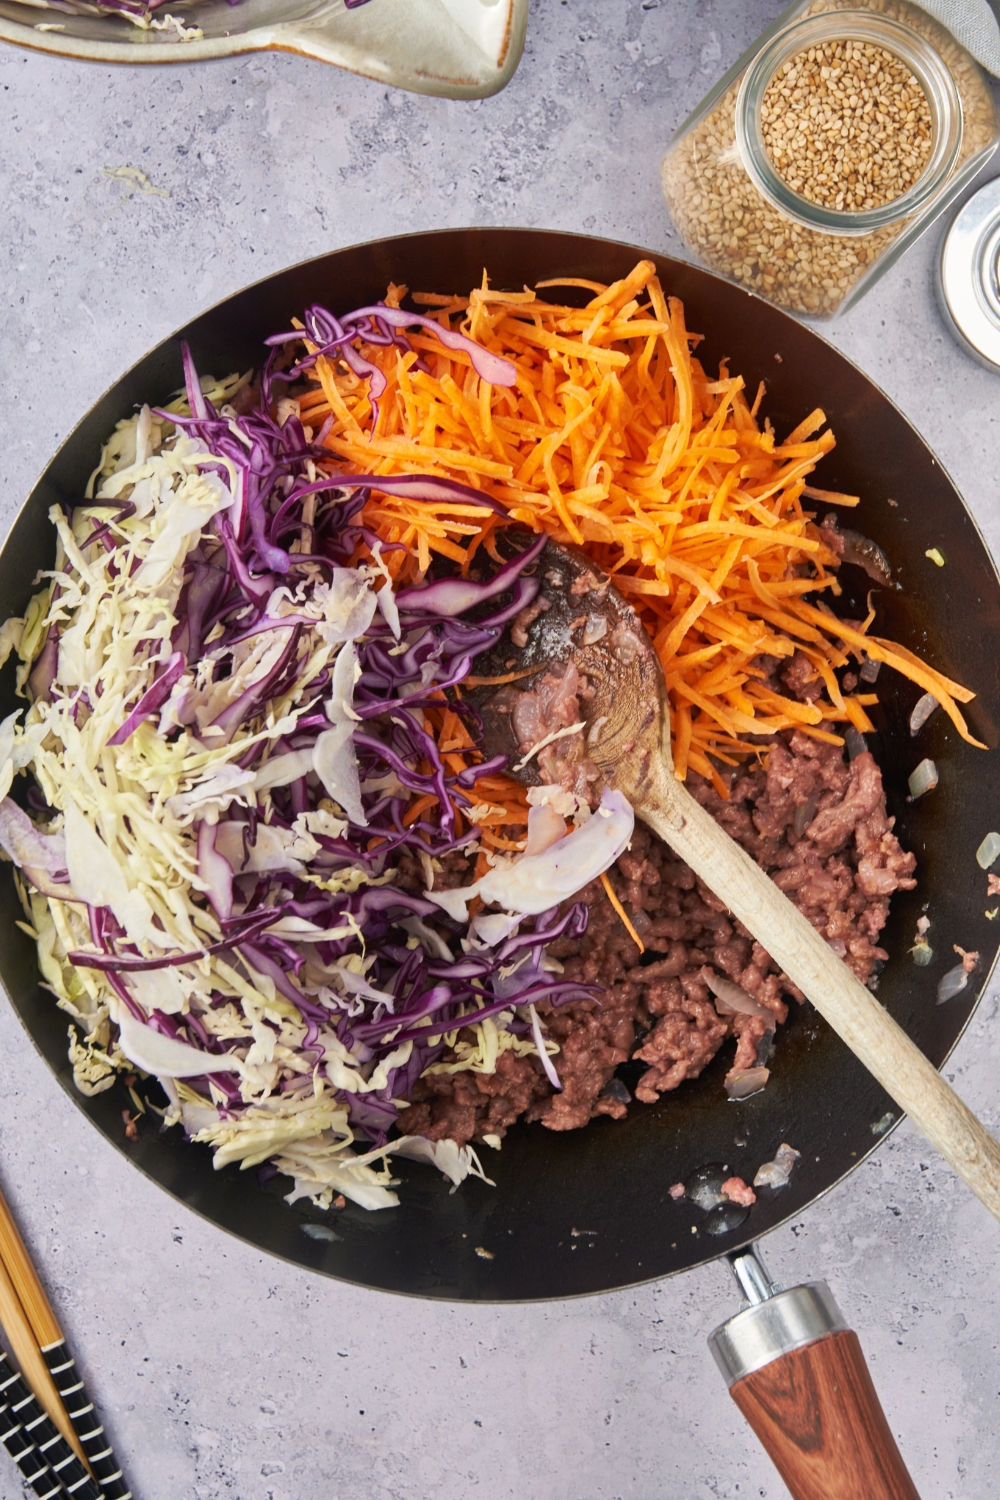 A skillet with the carrots and coleslaw mix added to the beef.